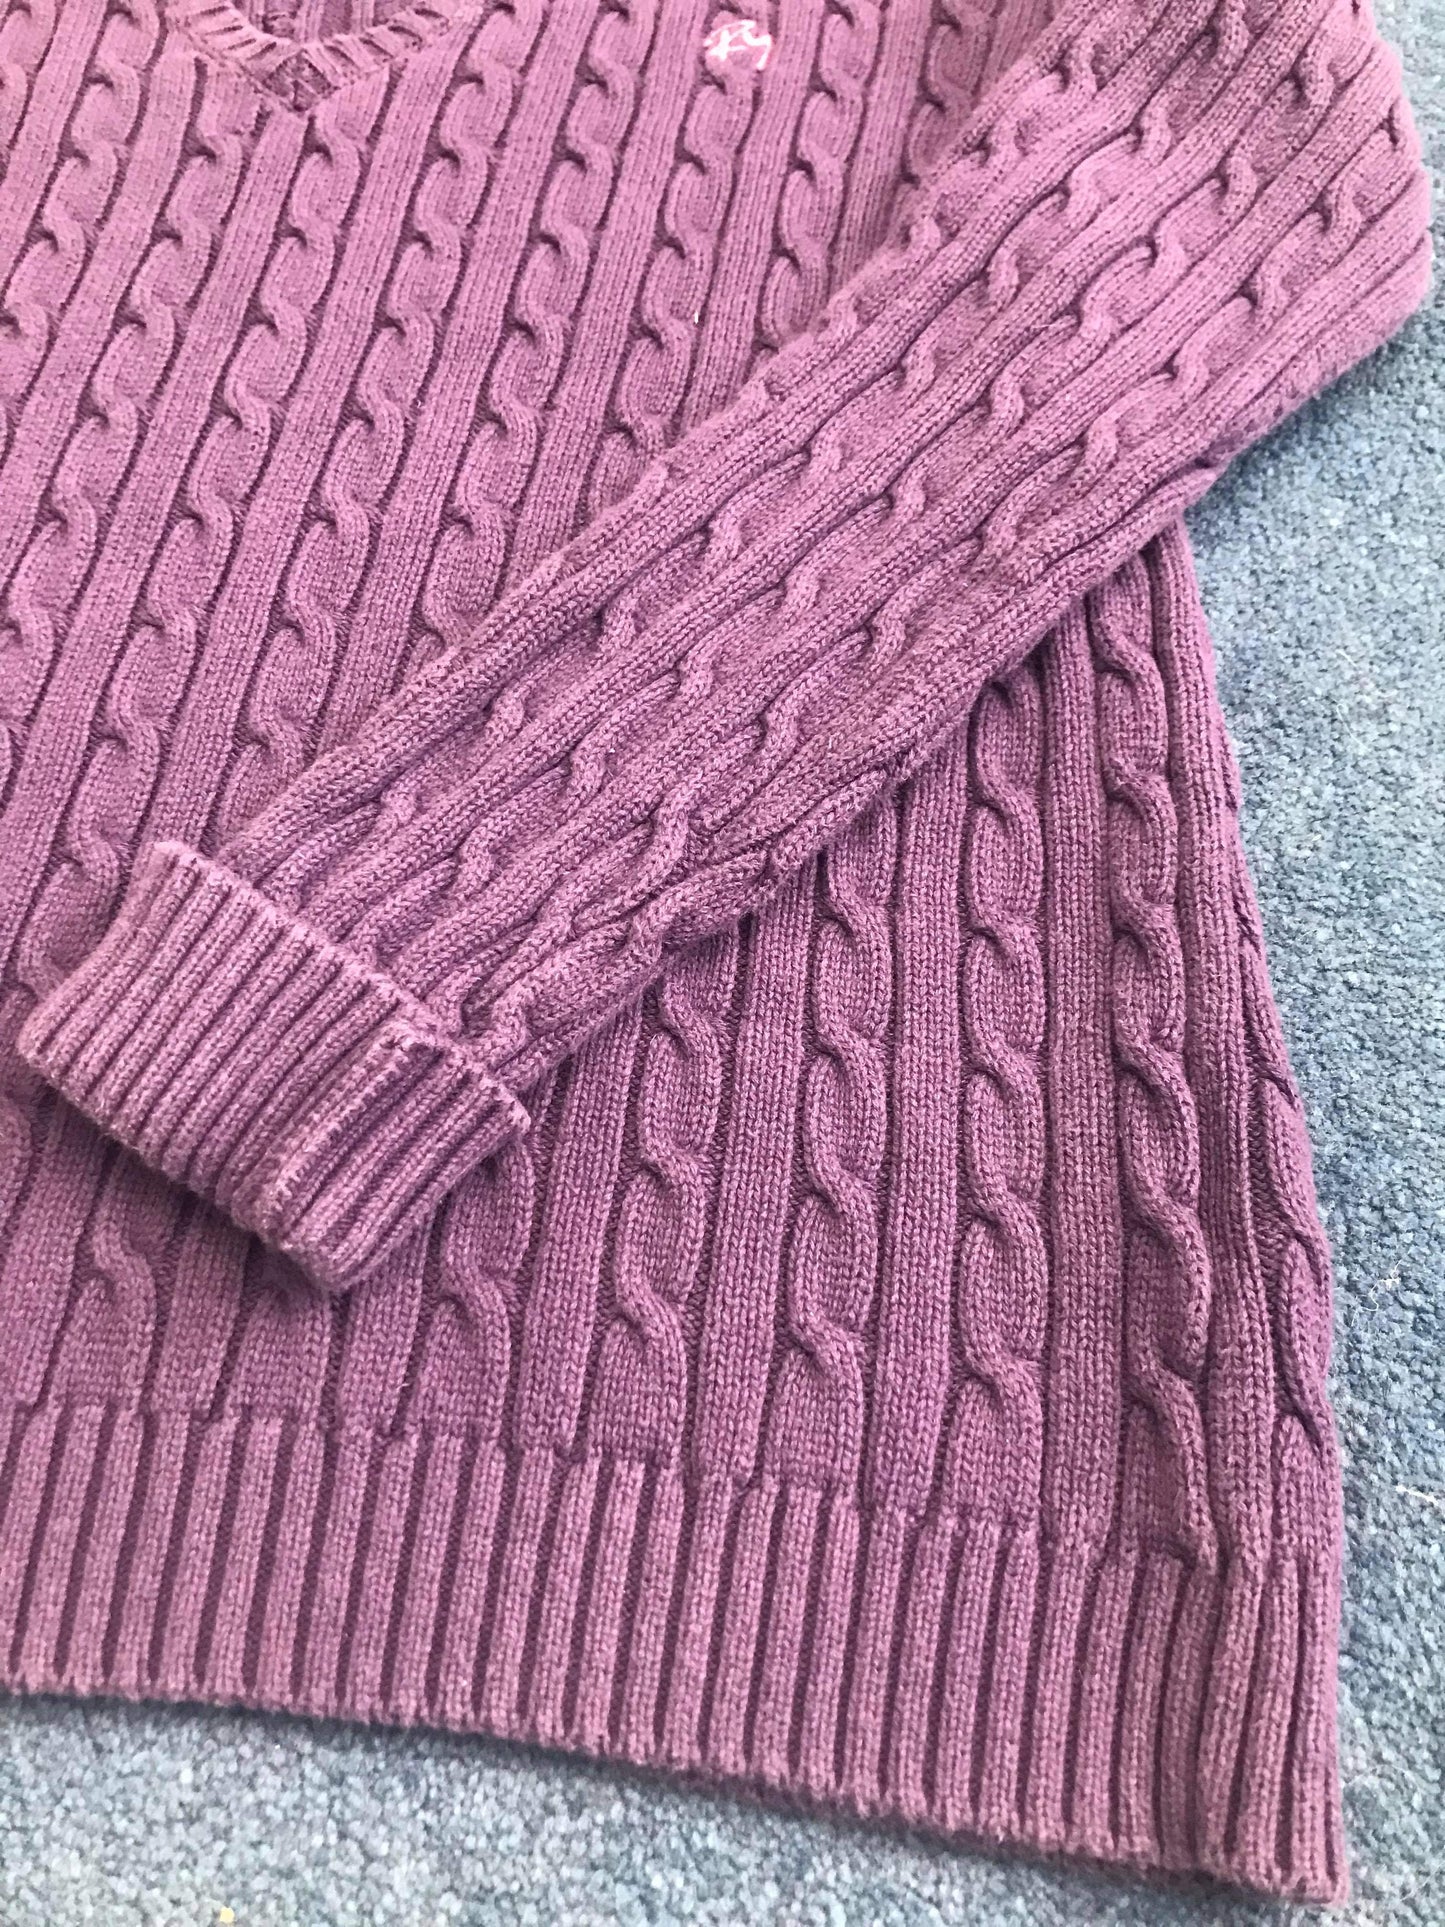 Rydale purple cable knit xl jumper FREE POSTAGE❤️